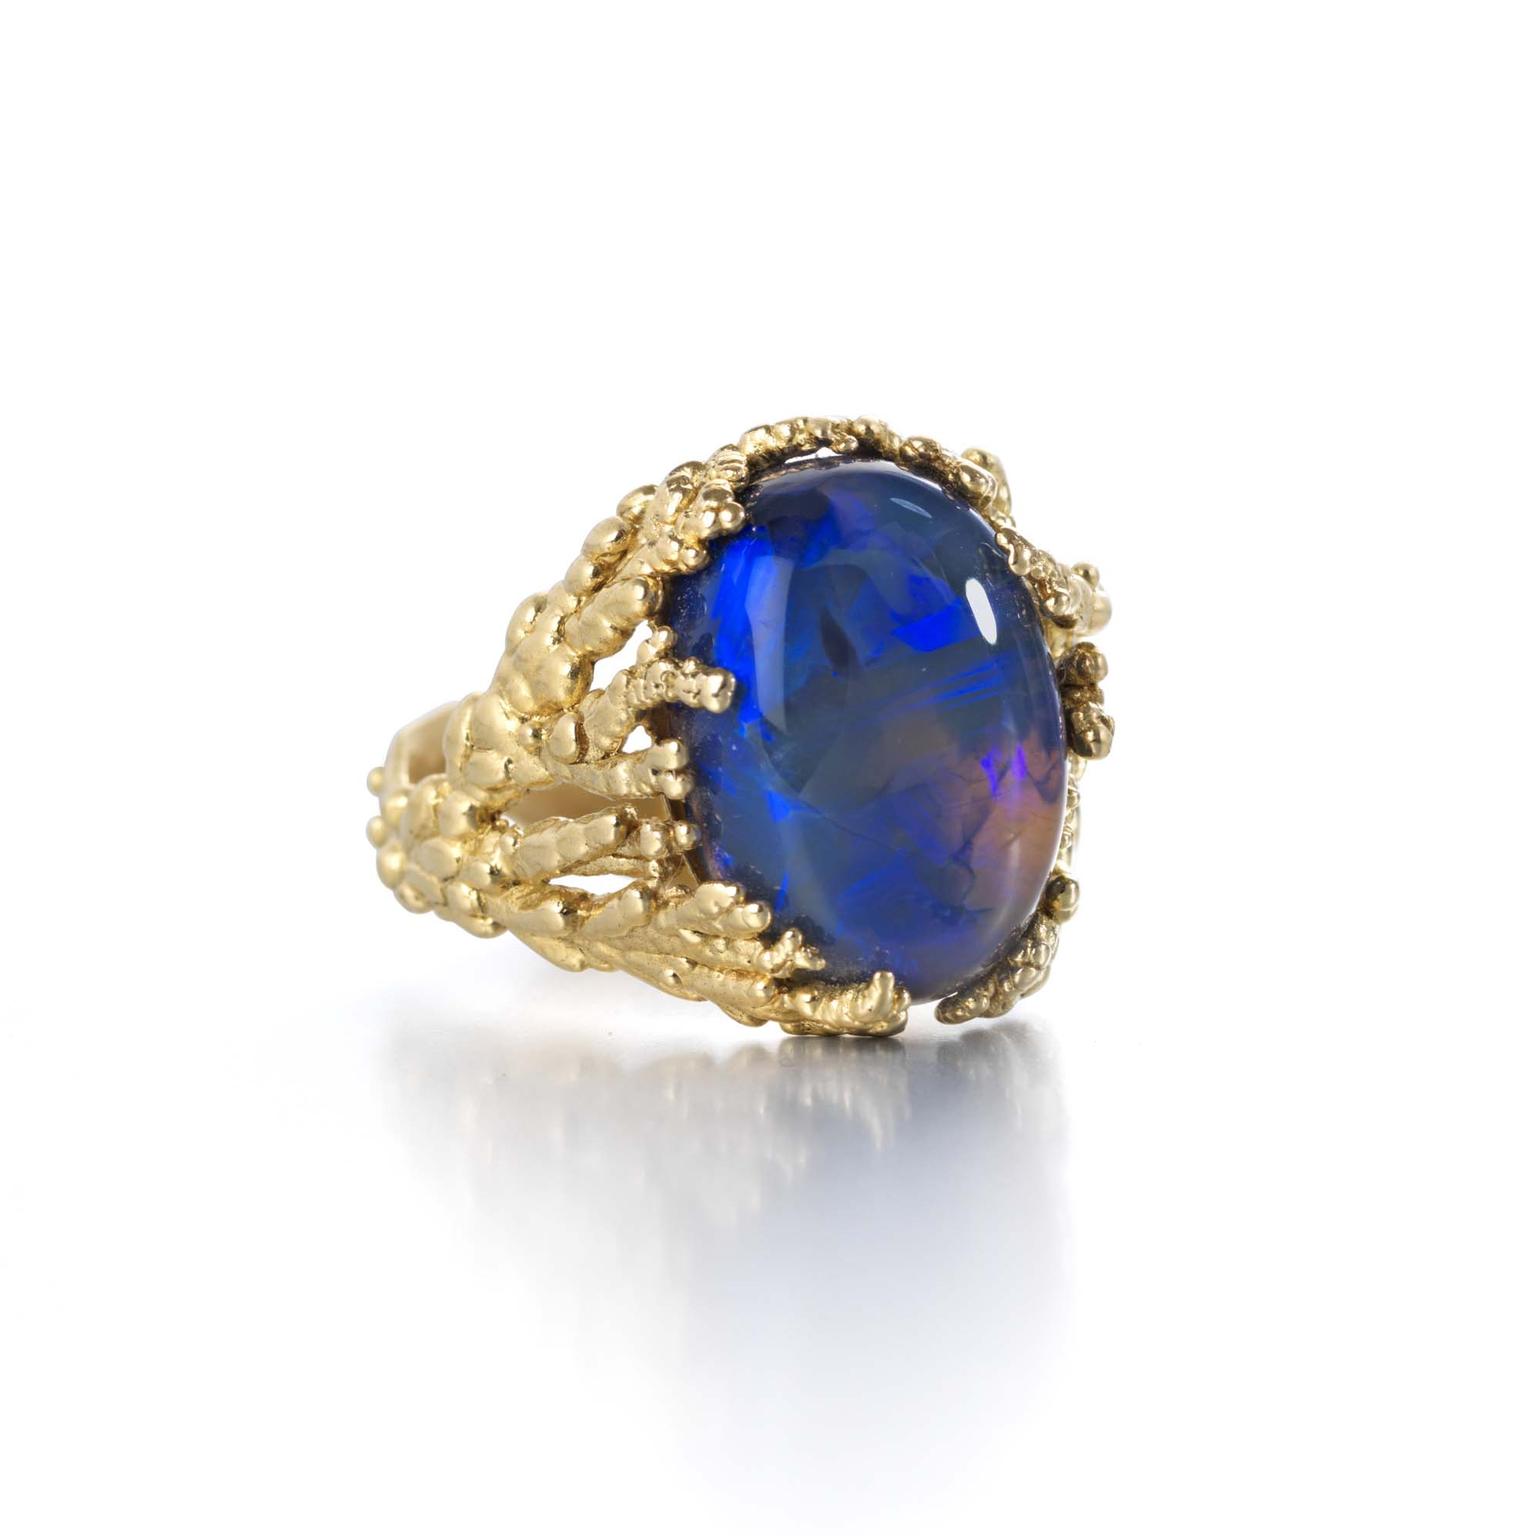 Ornella Iannuzzi Coral Atoll ring in yellow gold, set with a black crystal Australian opal.